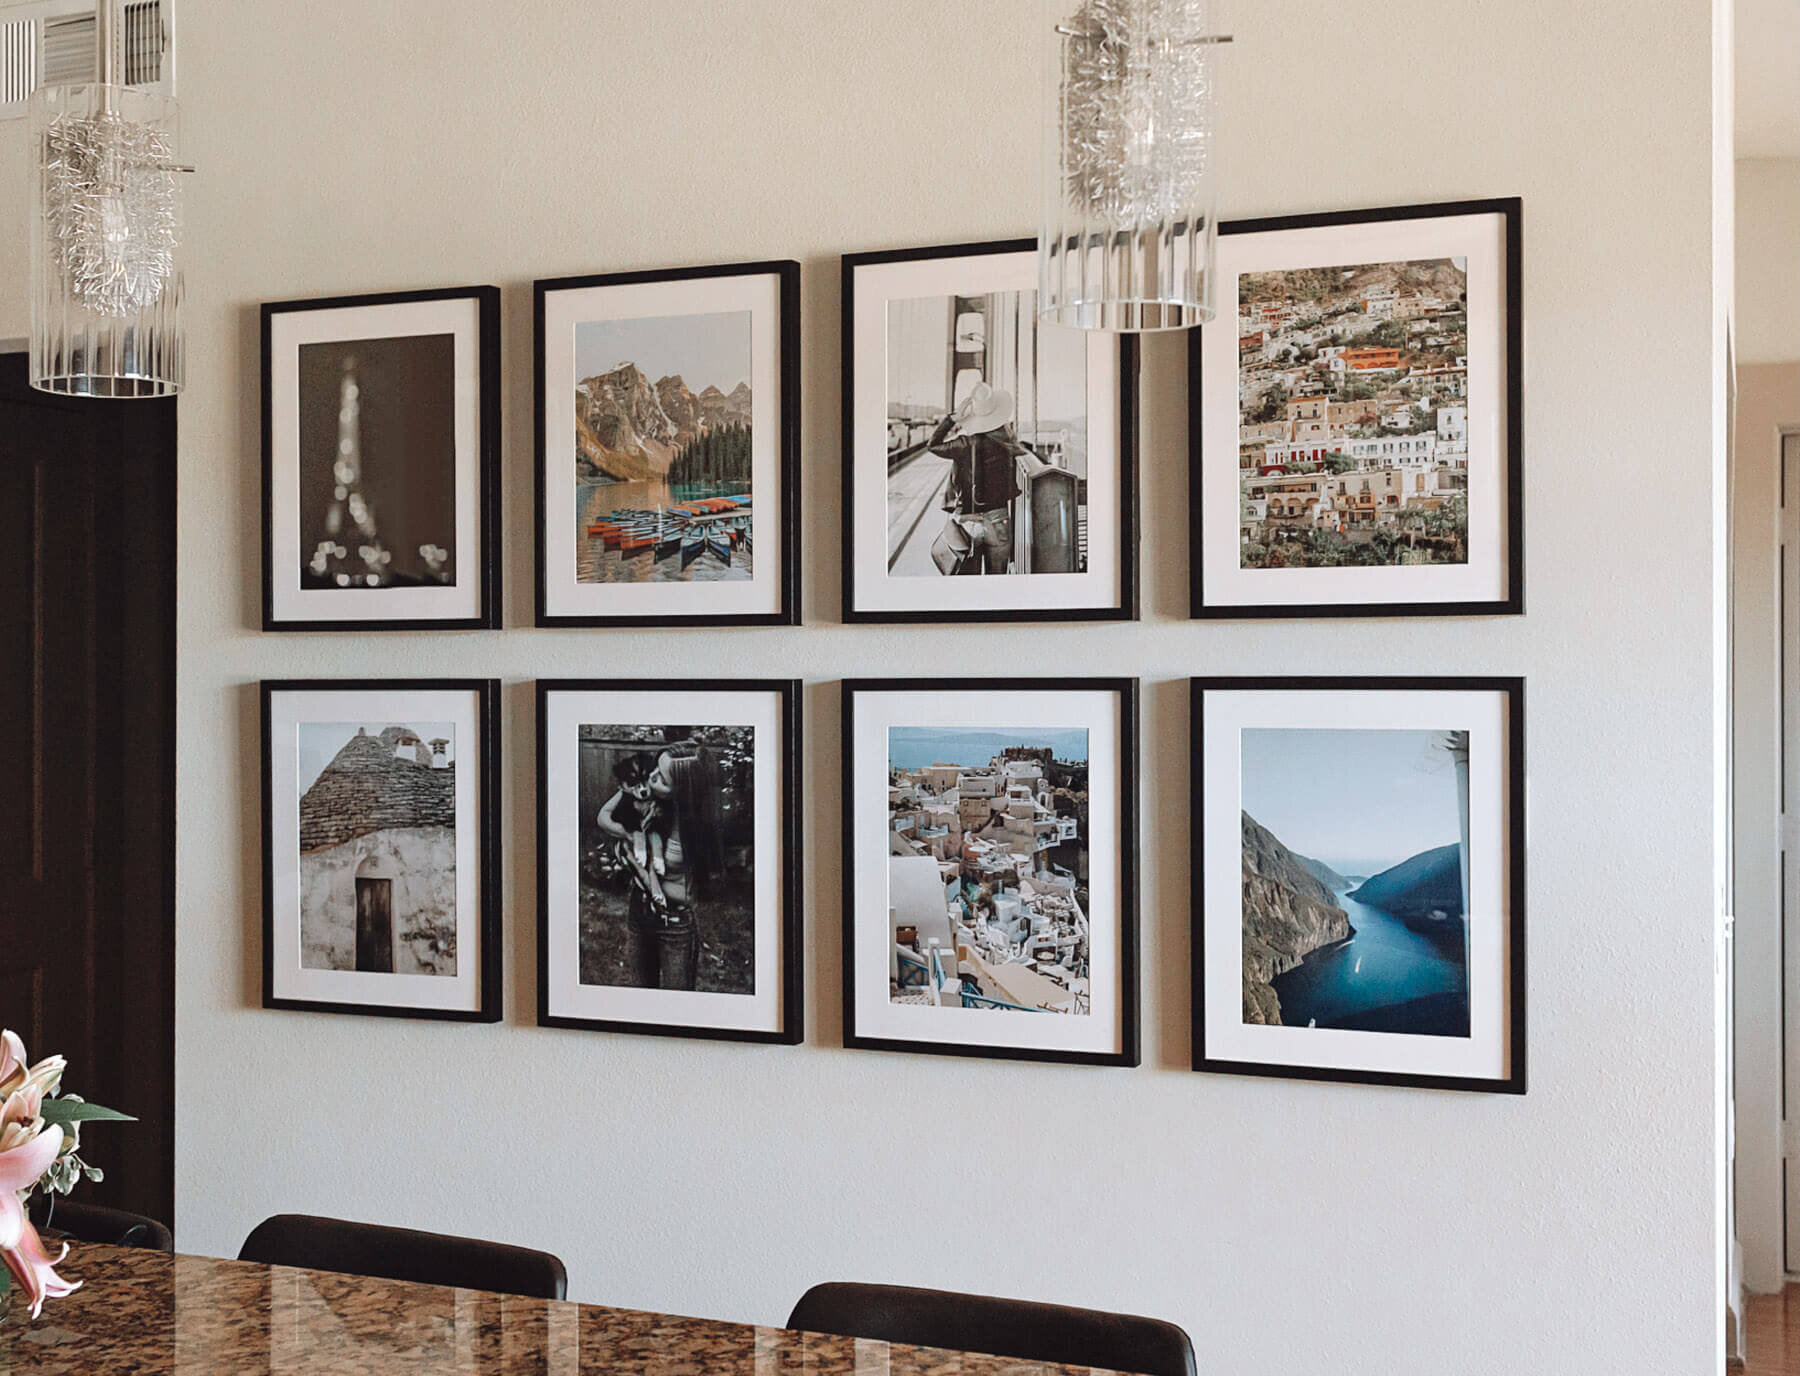 How to Hang a Gallery Wall with Command Strips - The Homes I Have Made